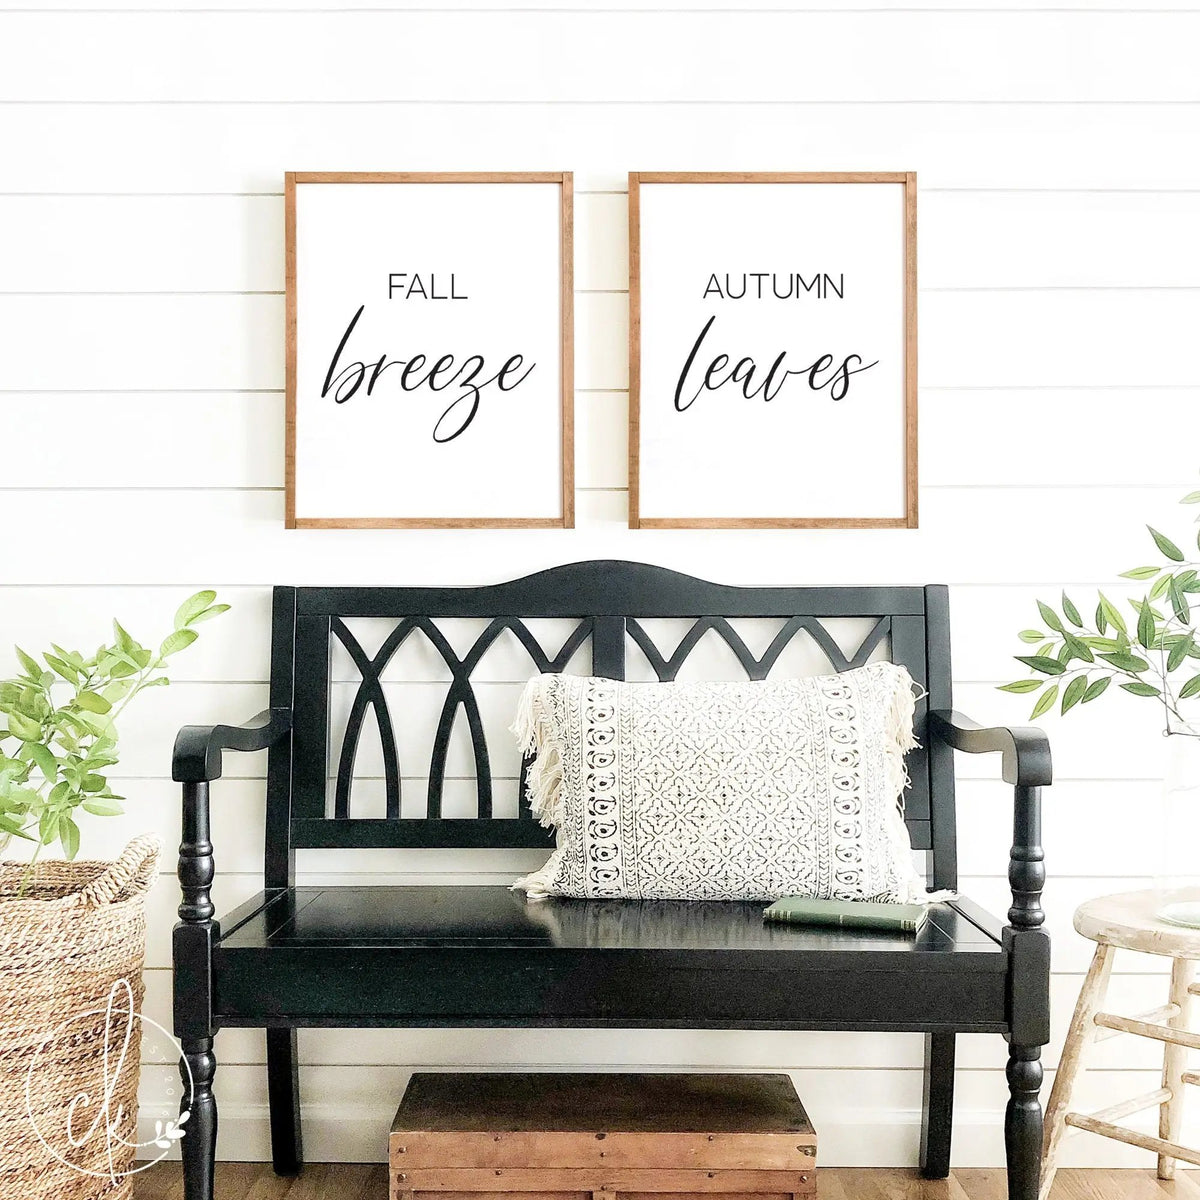 fall breeze, autumn leaves signs | fall wall decor |  wood signs for fall | rustic wood signs | autumn wall decor